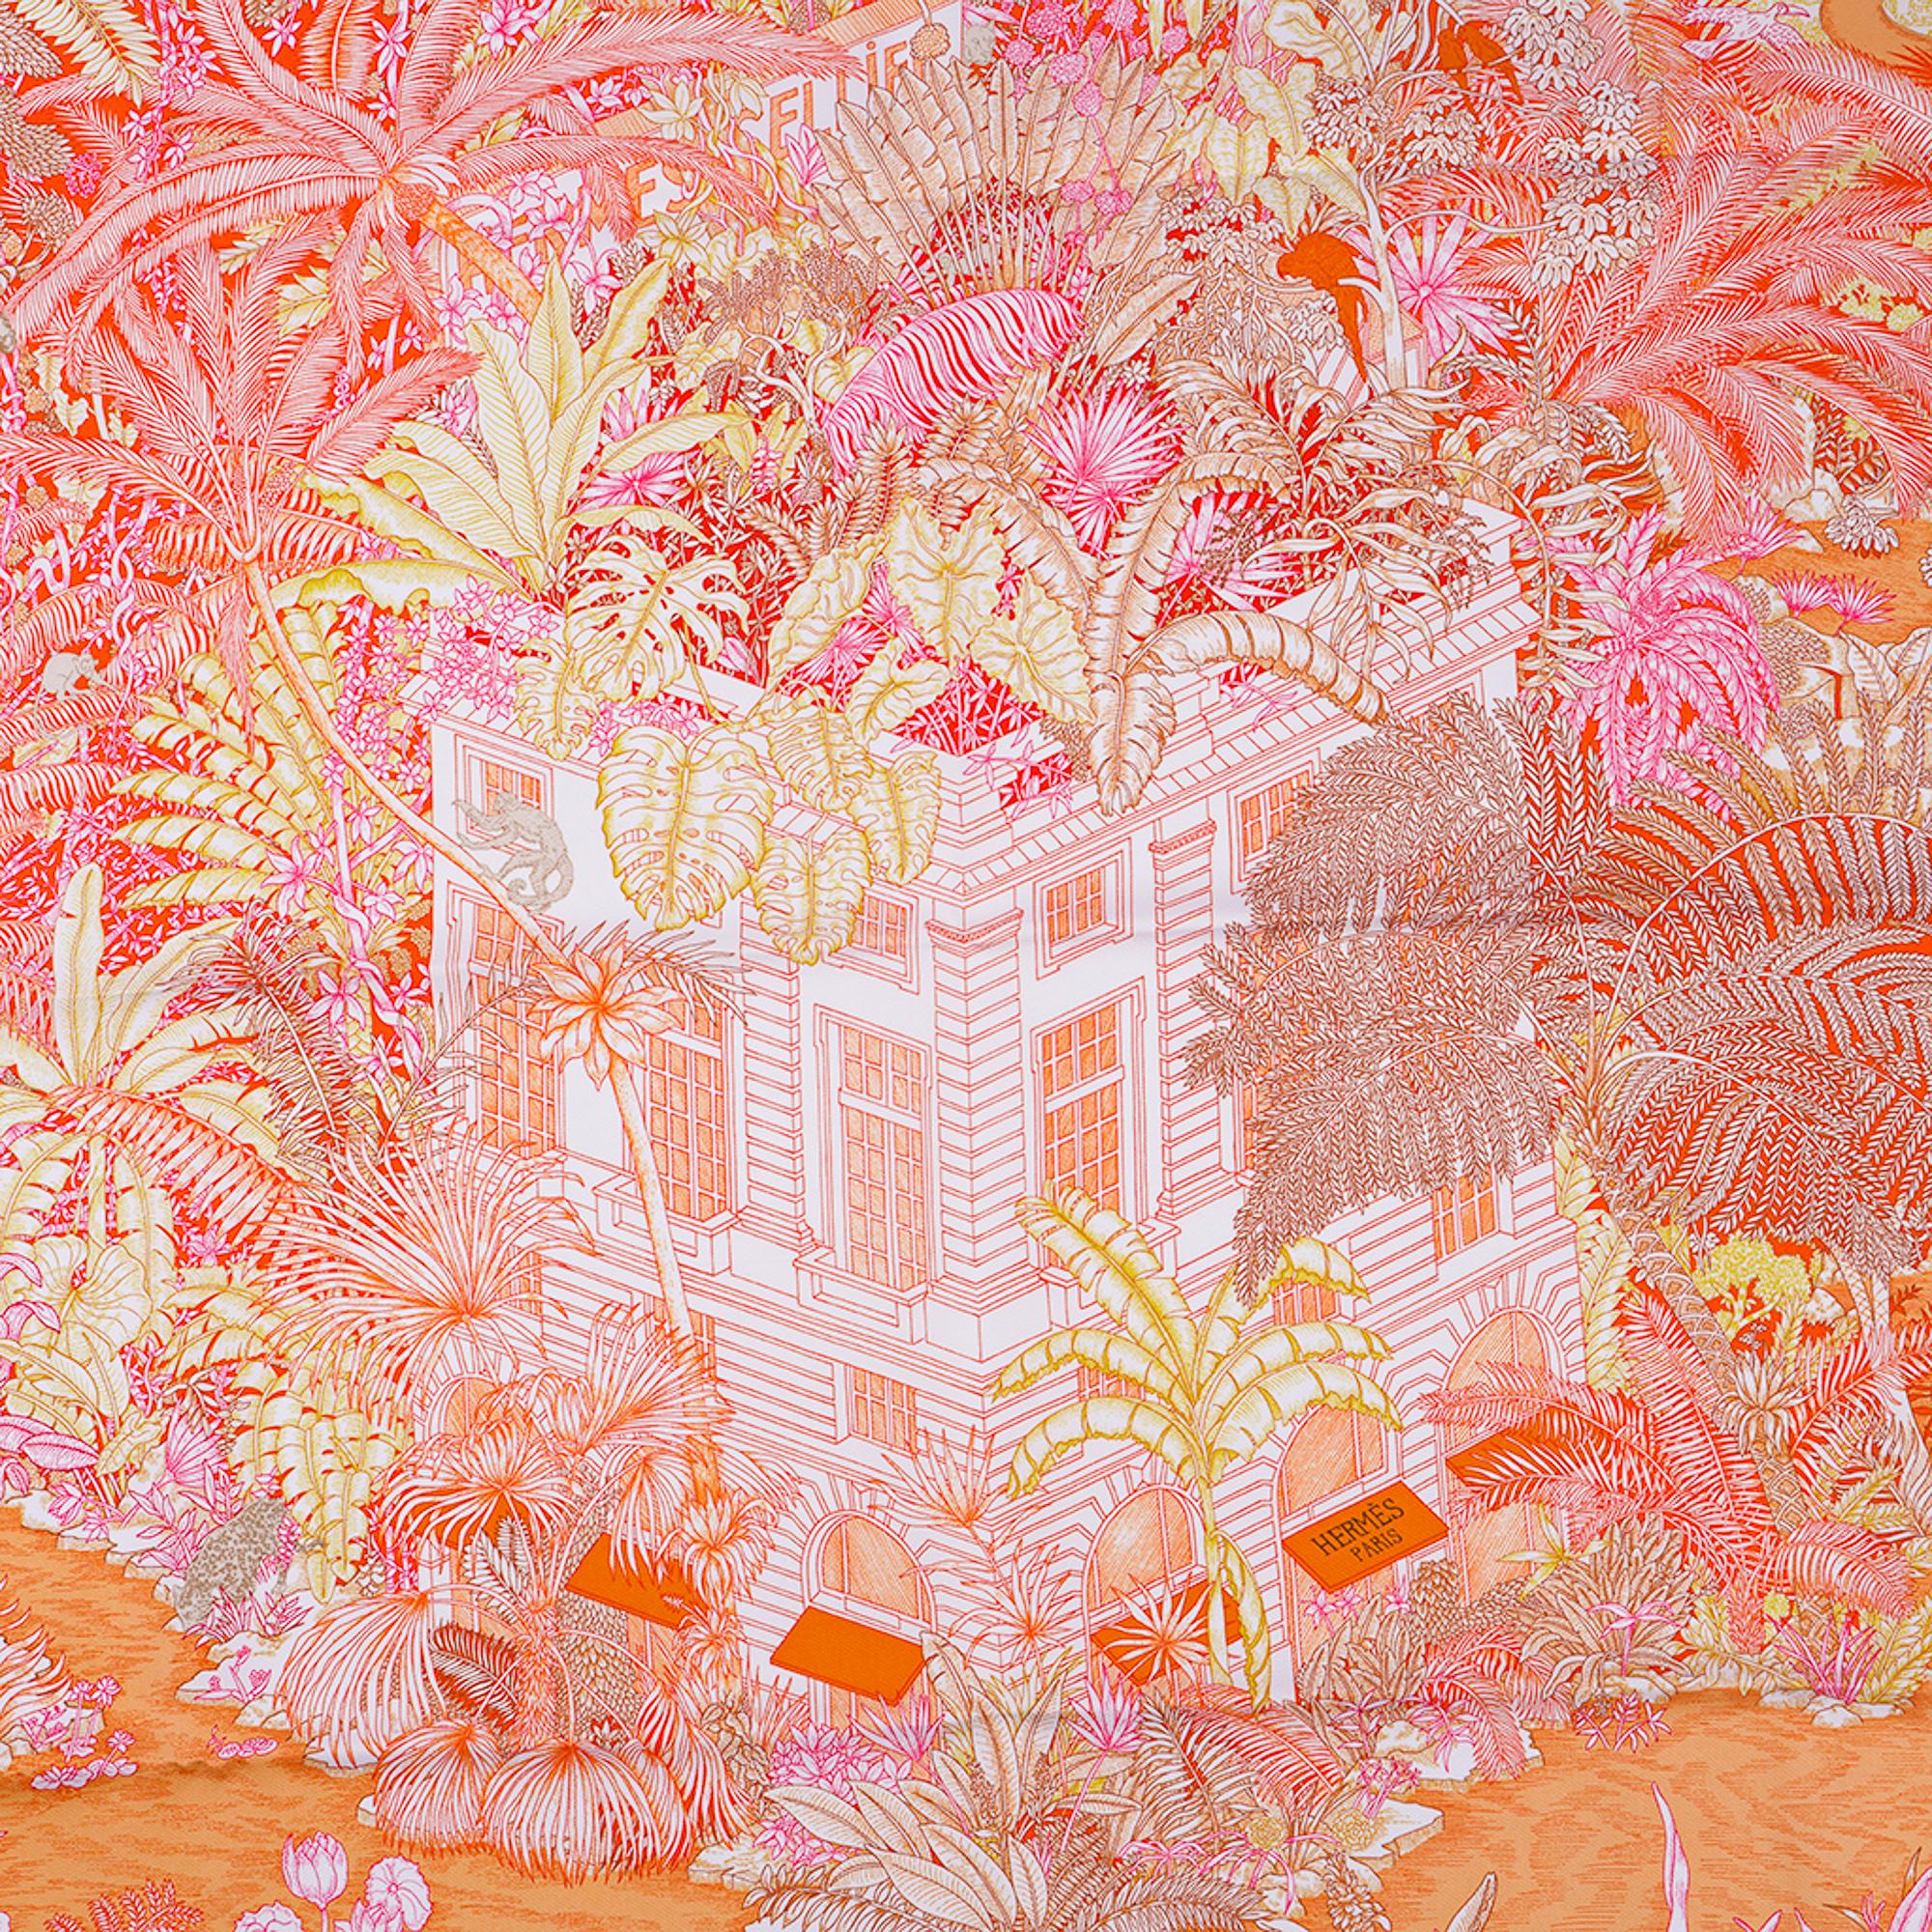 Mightychic offers a guaranteed authentic Hermes Faubourg Tropical scarf featured in Orange, Mangue and Rose.
Designed by Octave Marsal and Theo de Gueltzl.
This Hermes 90 silk scarf is set with a wonderful tropical jungle filled with marvelous